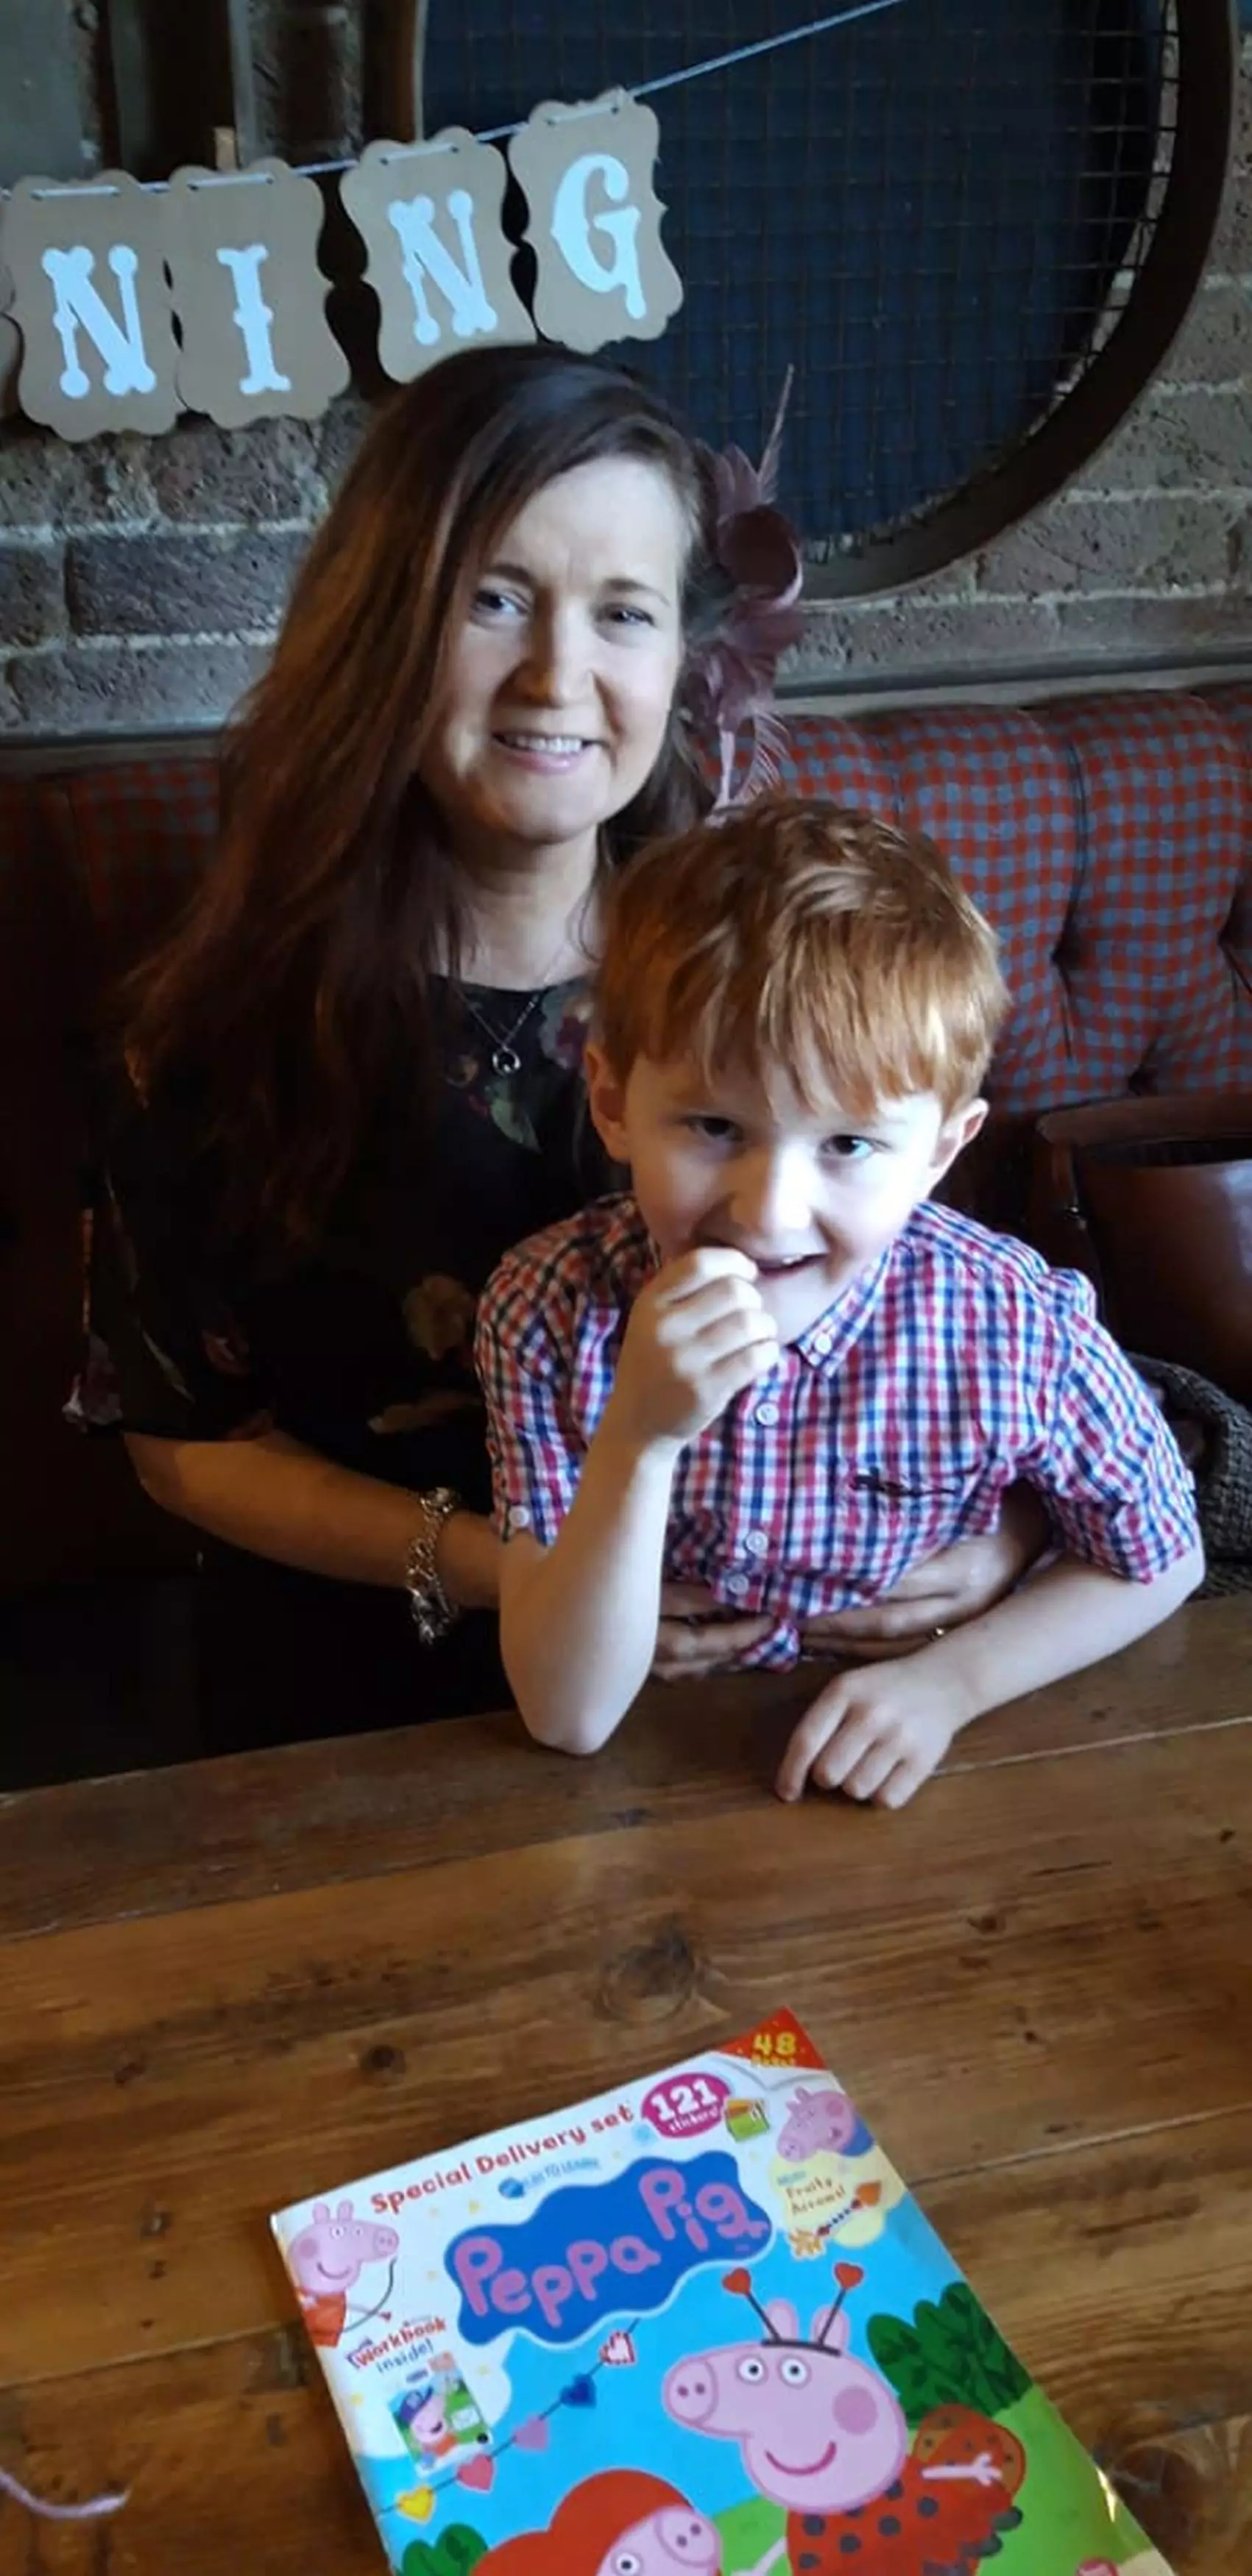 Sarah had spent £1000 on the new furniture hoping to make a new home for her and son Joel (